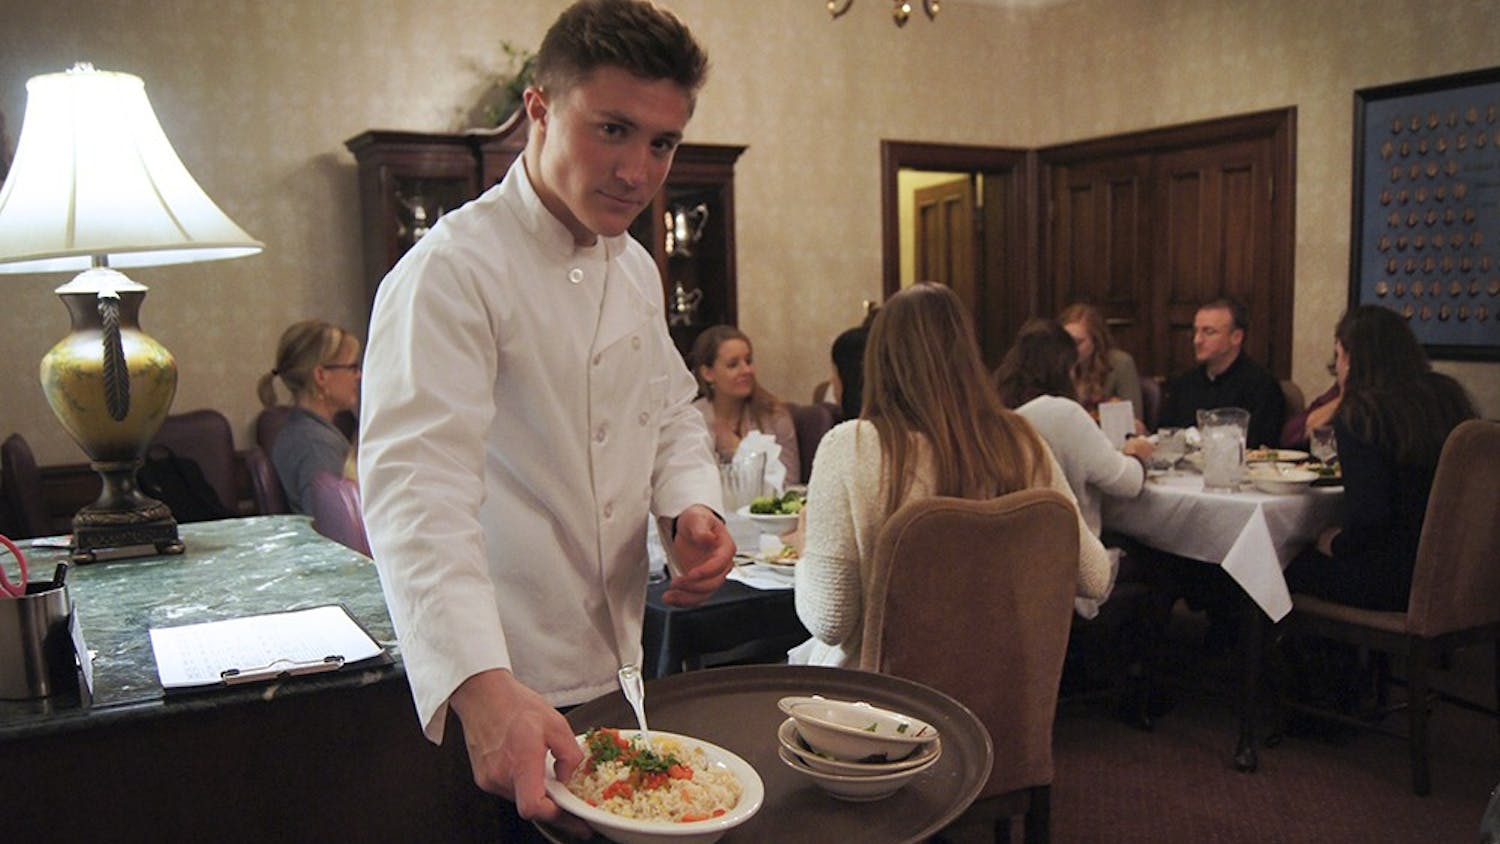 Evans Scholar Jack Conway helps serve formal dinner at the Kappa Alpha Theta house on Wednesday. Evans Scholars work as kitchen staff at a sorority house of their choice to supplement for their house not having a kitchen. This opportunity provides the Scholars with meals, and a paid job as well. 